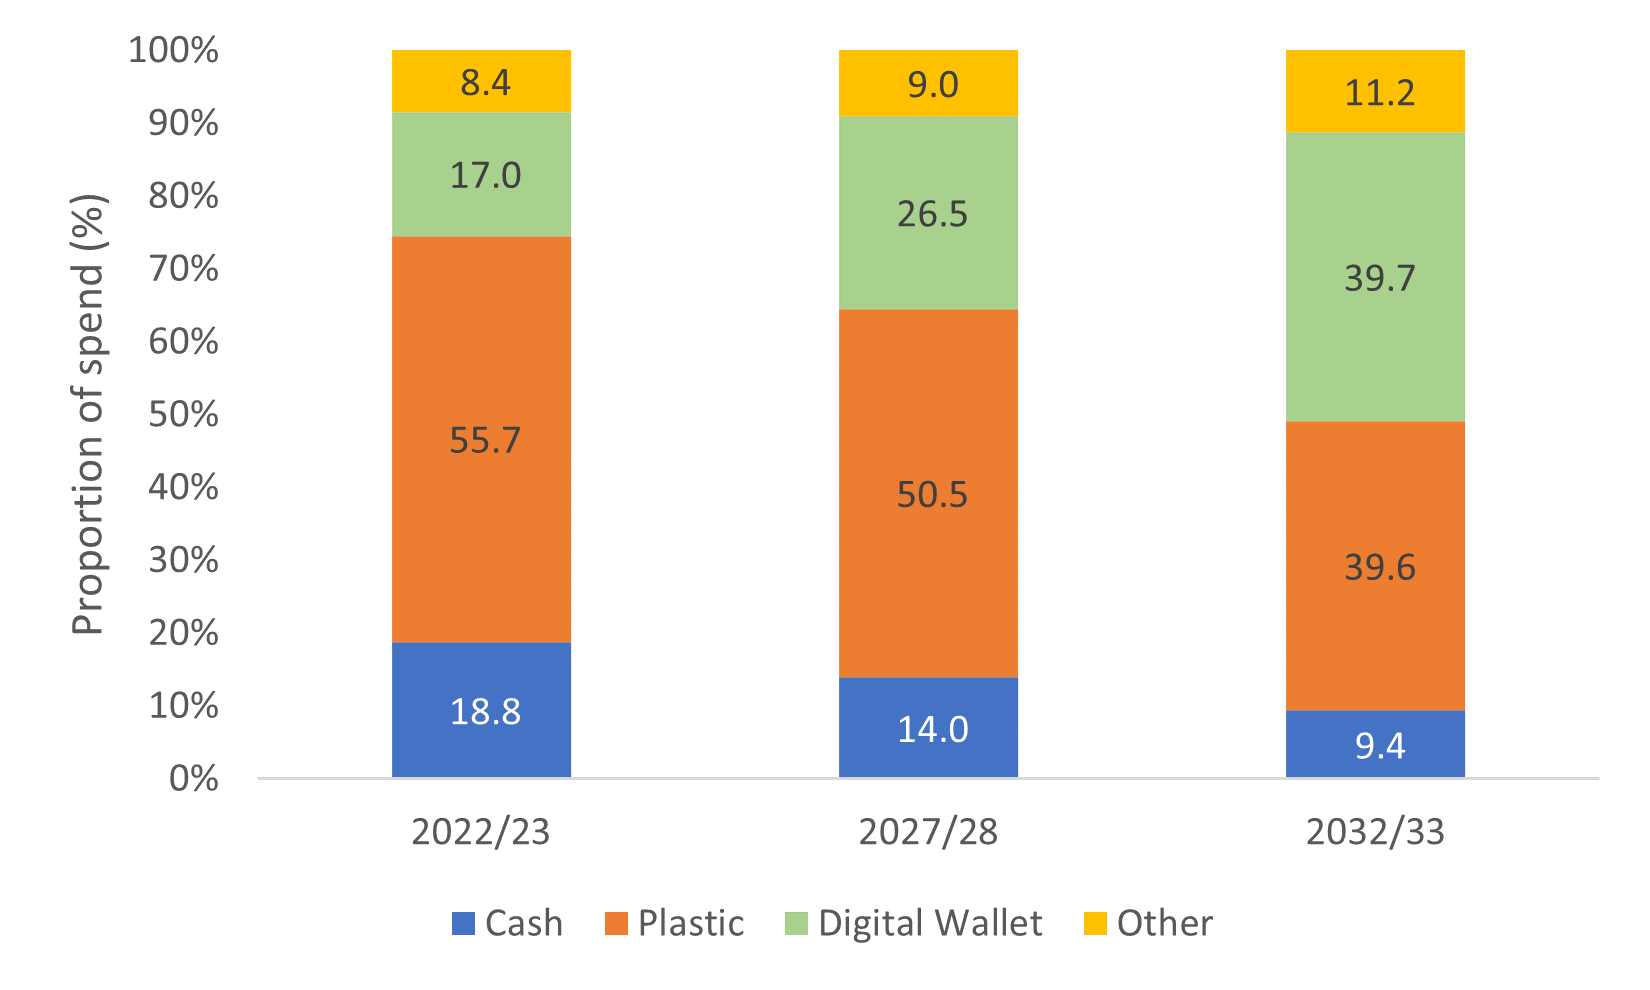 Digital wallet spending to overtake plastics within the next decade. 